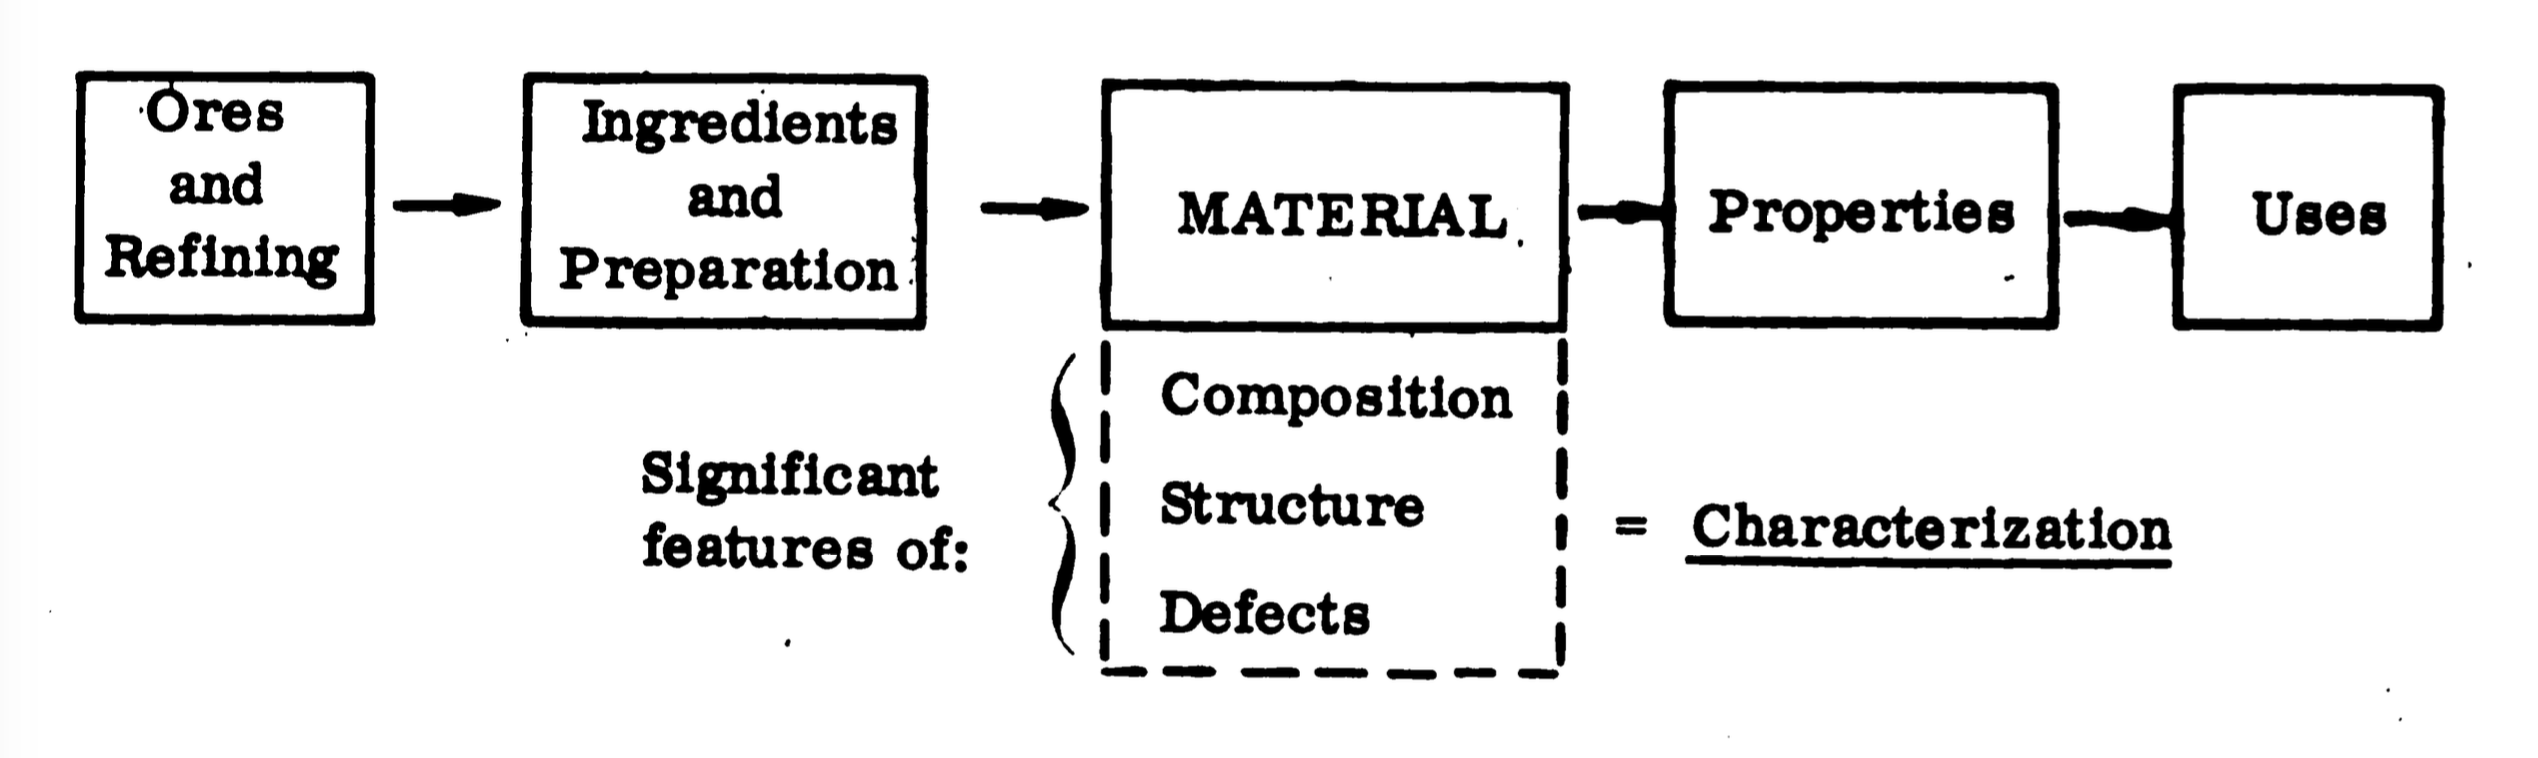 Diagram shows process using boxes and arrows, pointing from ores to ingredients to material (which is characterized by composition, structure, and defects) to properties to uses.